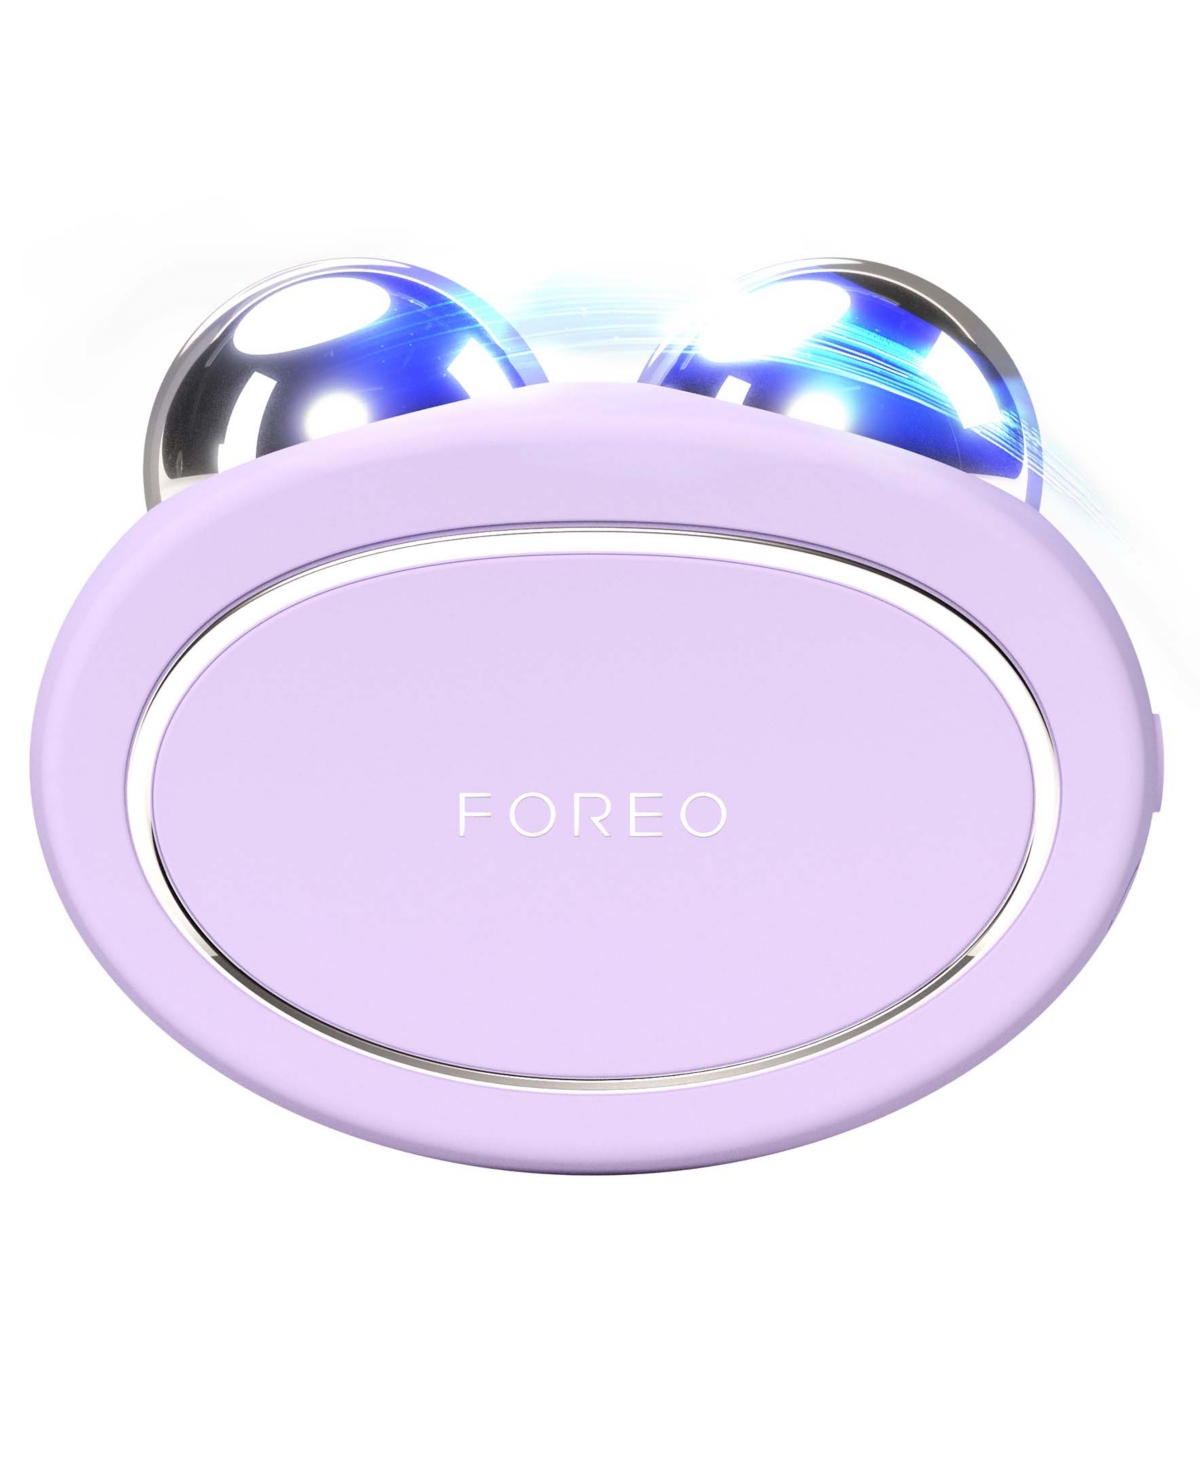 Foreo Bear 2 Advanced Microcurrent Facial Toning Device In White